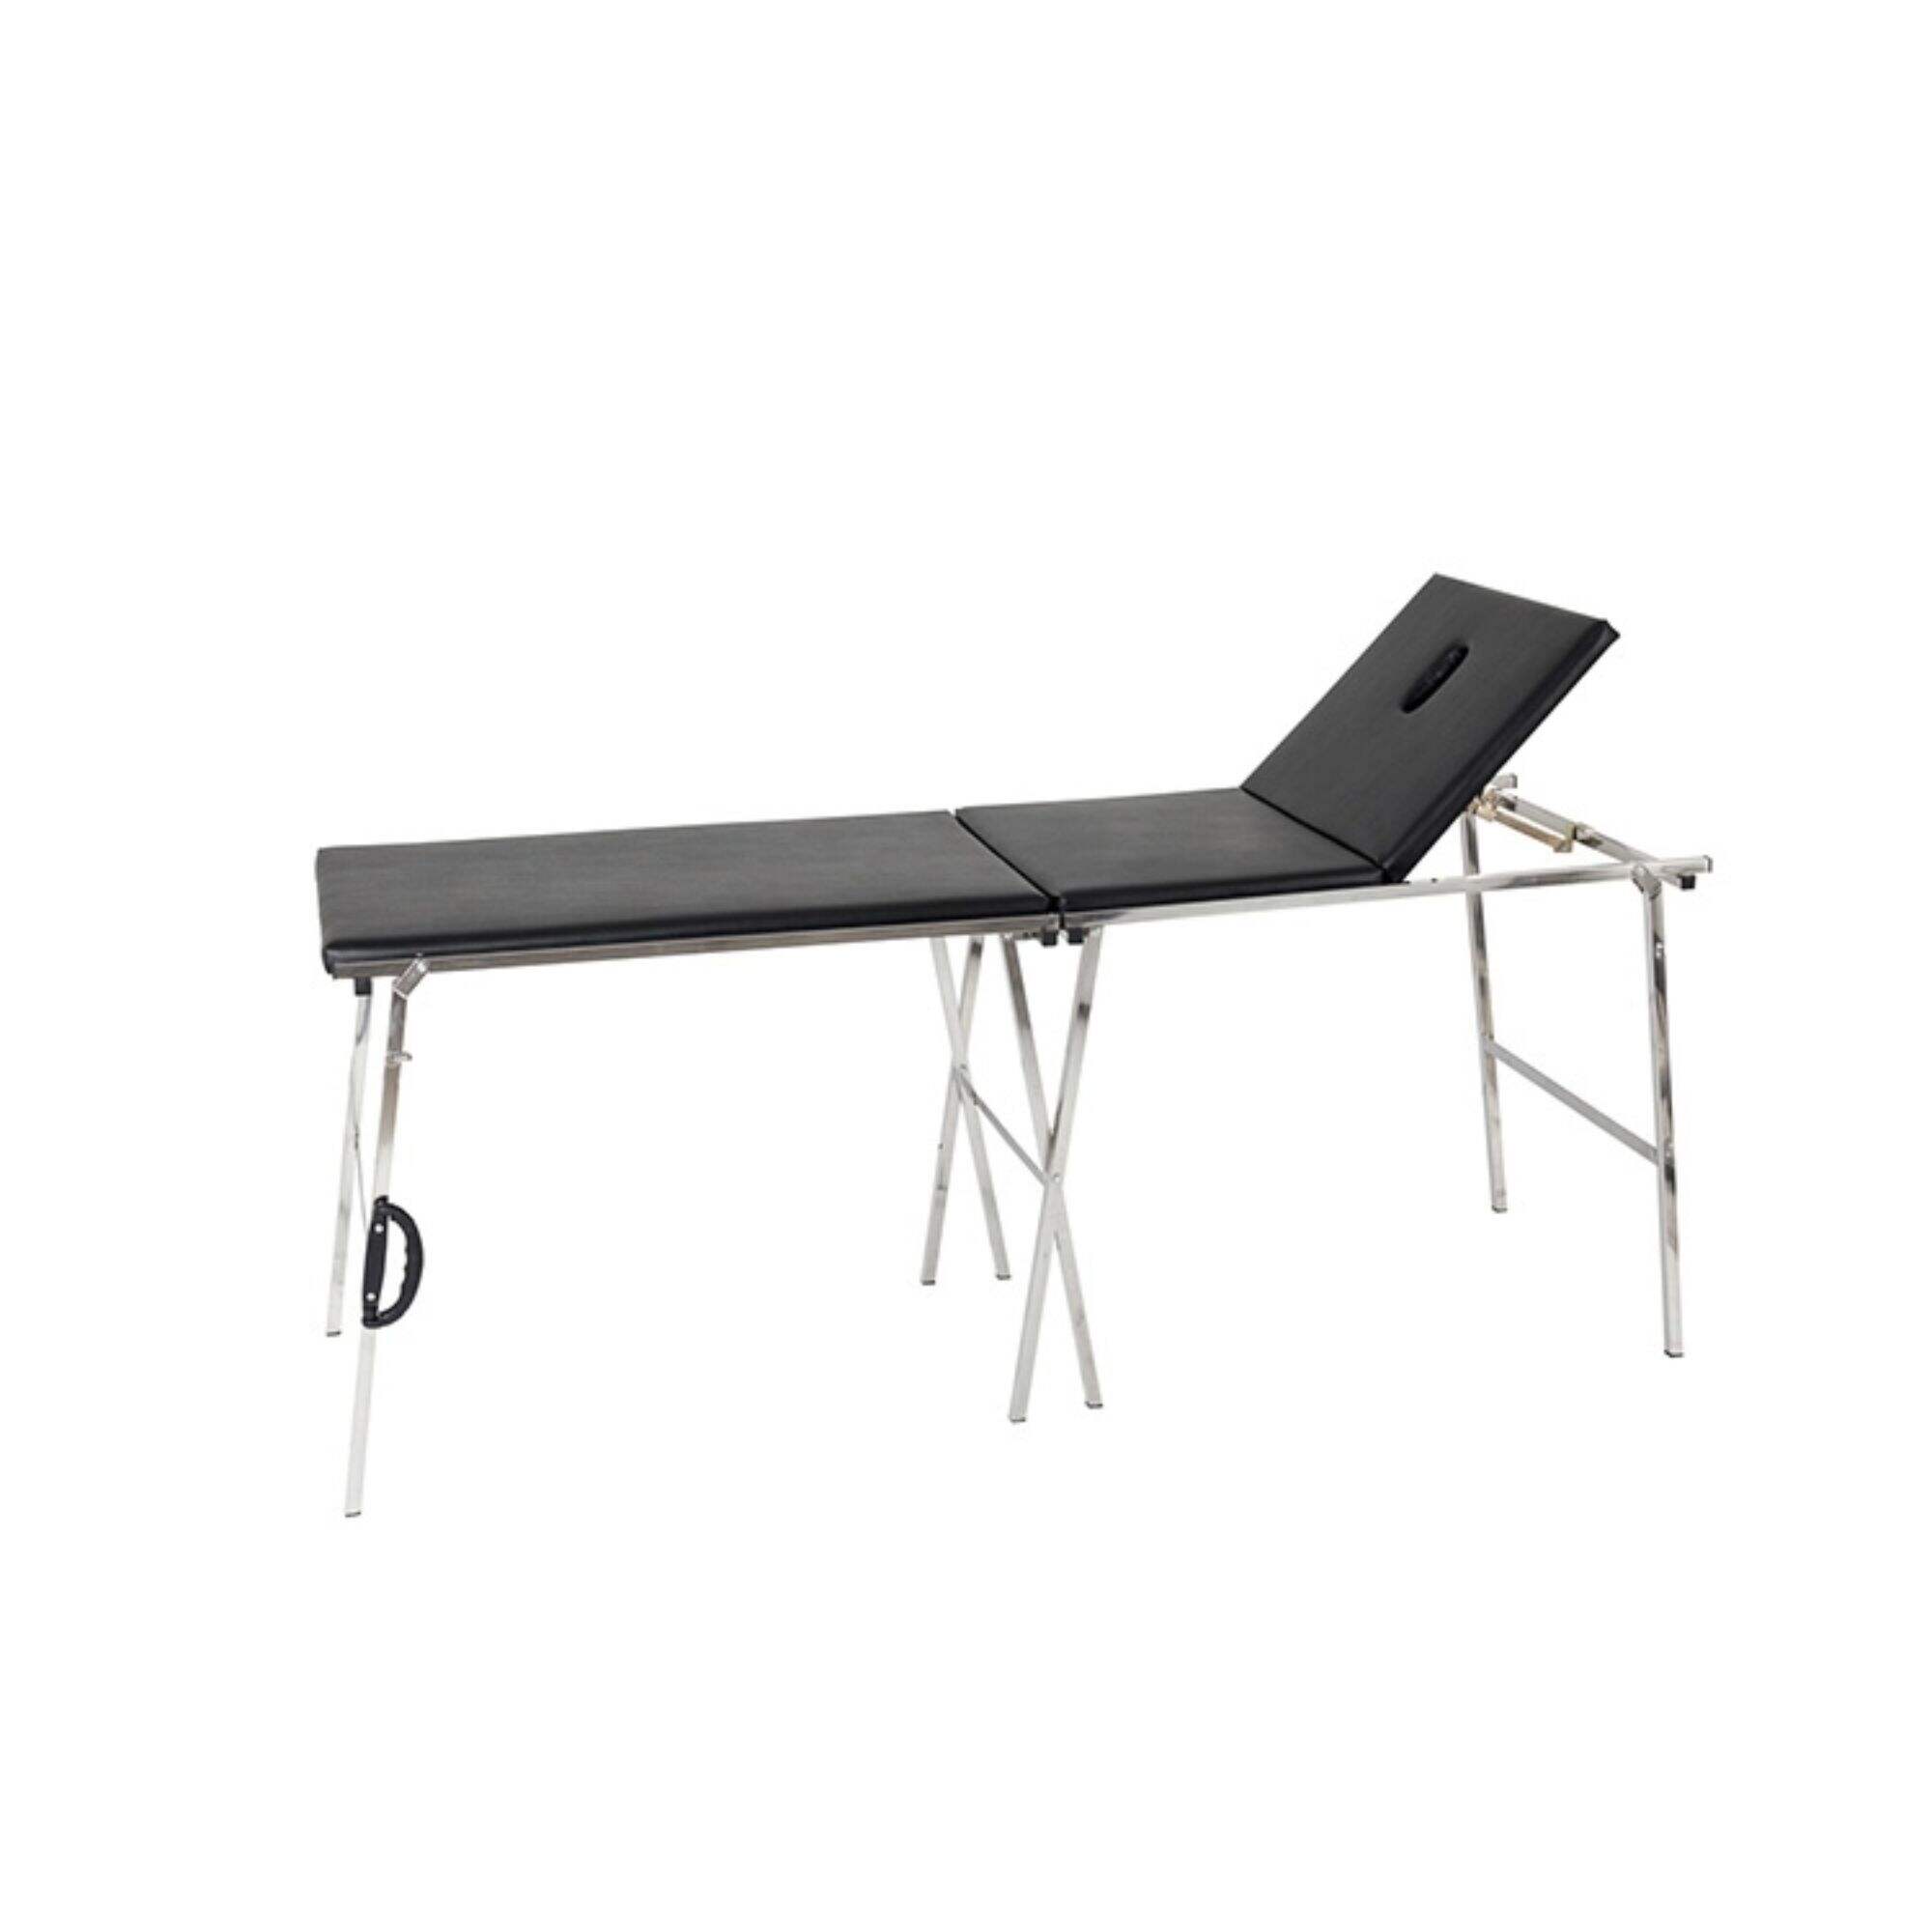 YXH-107 Medical Stainless Steel Examination Table